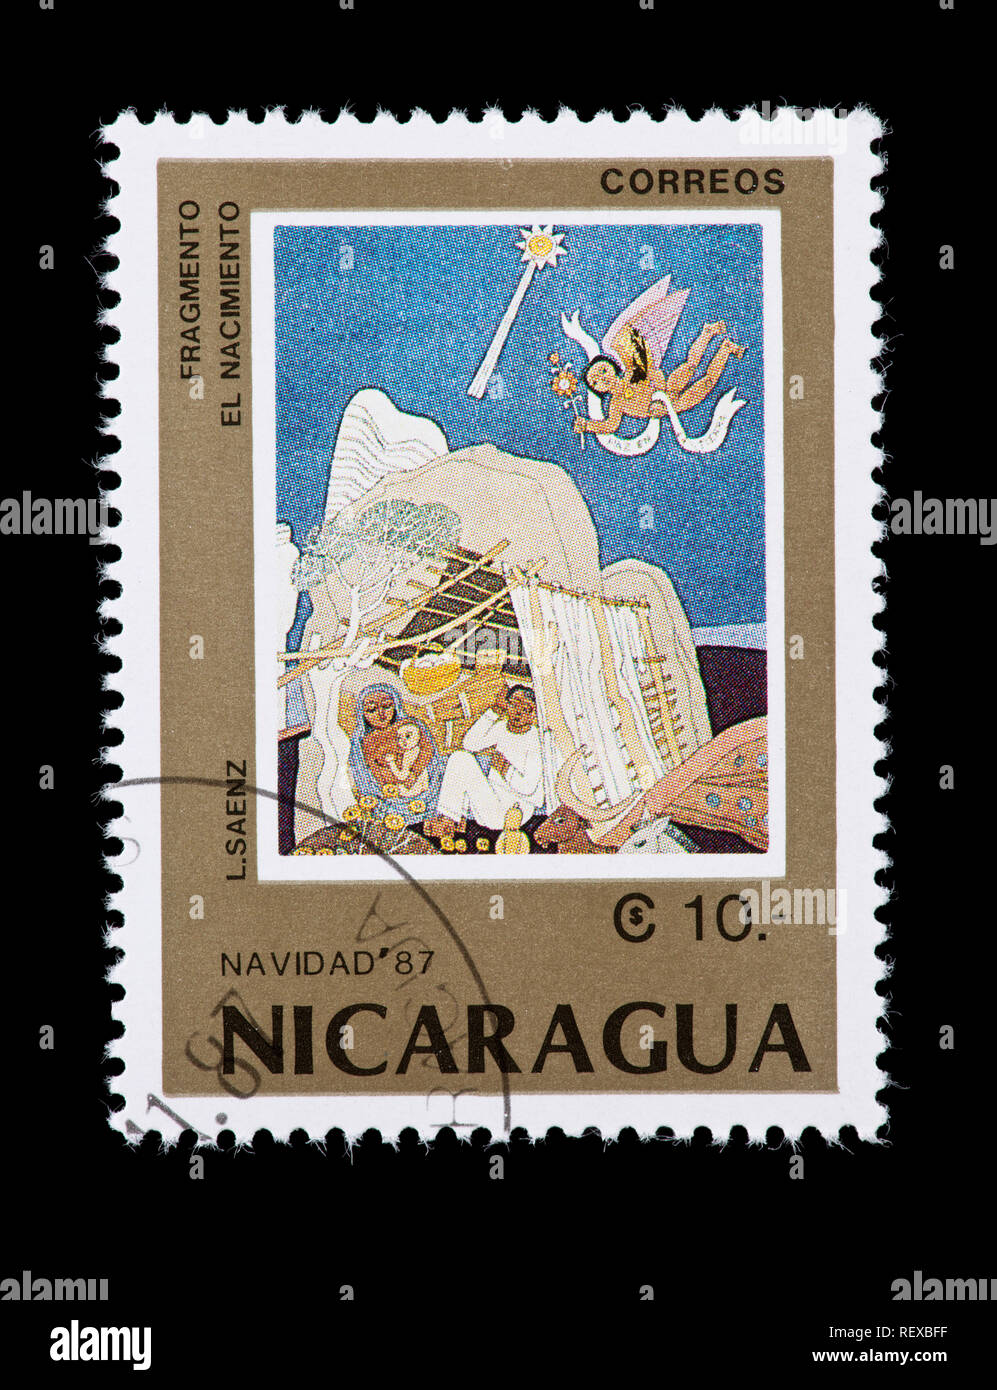 Postage stamp from Nicaragua depicting a L. Saenz painting of the Nativity. Stock Photo